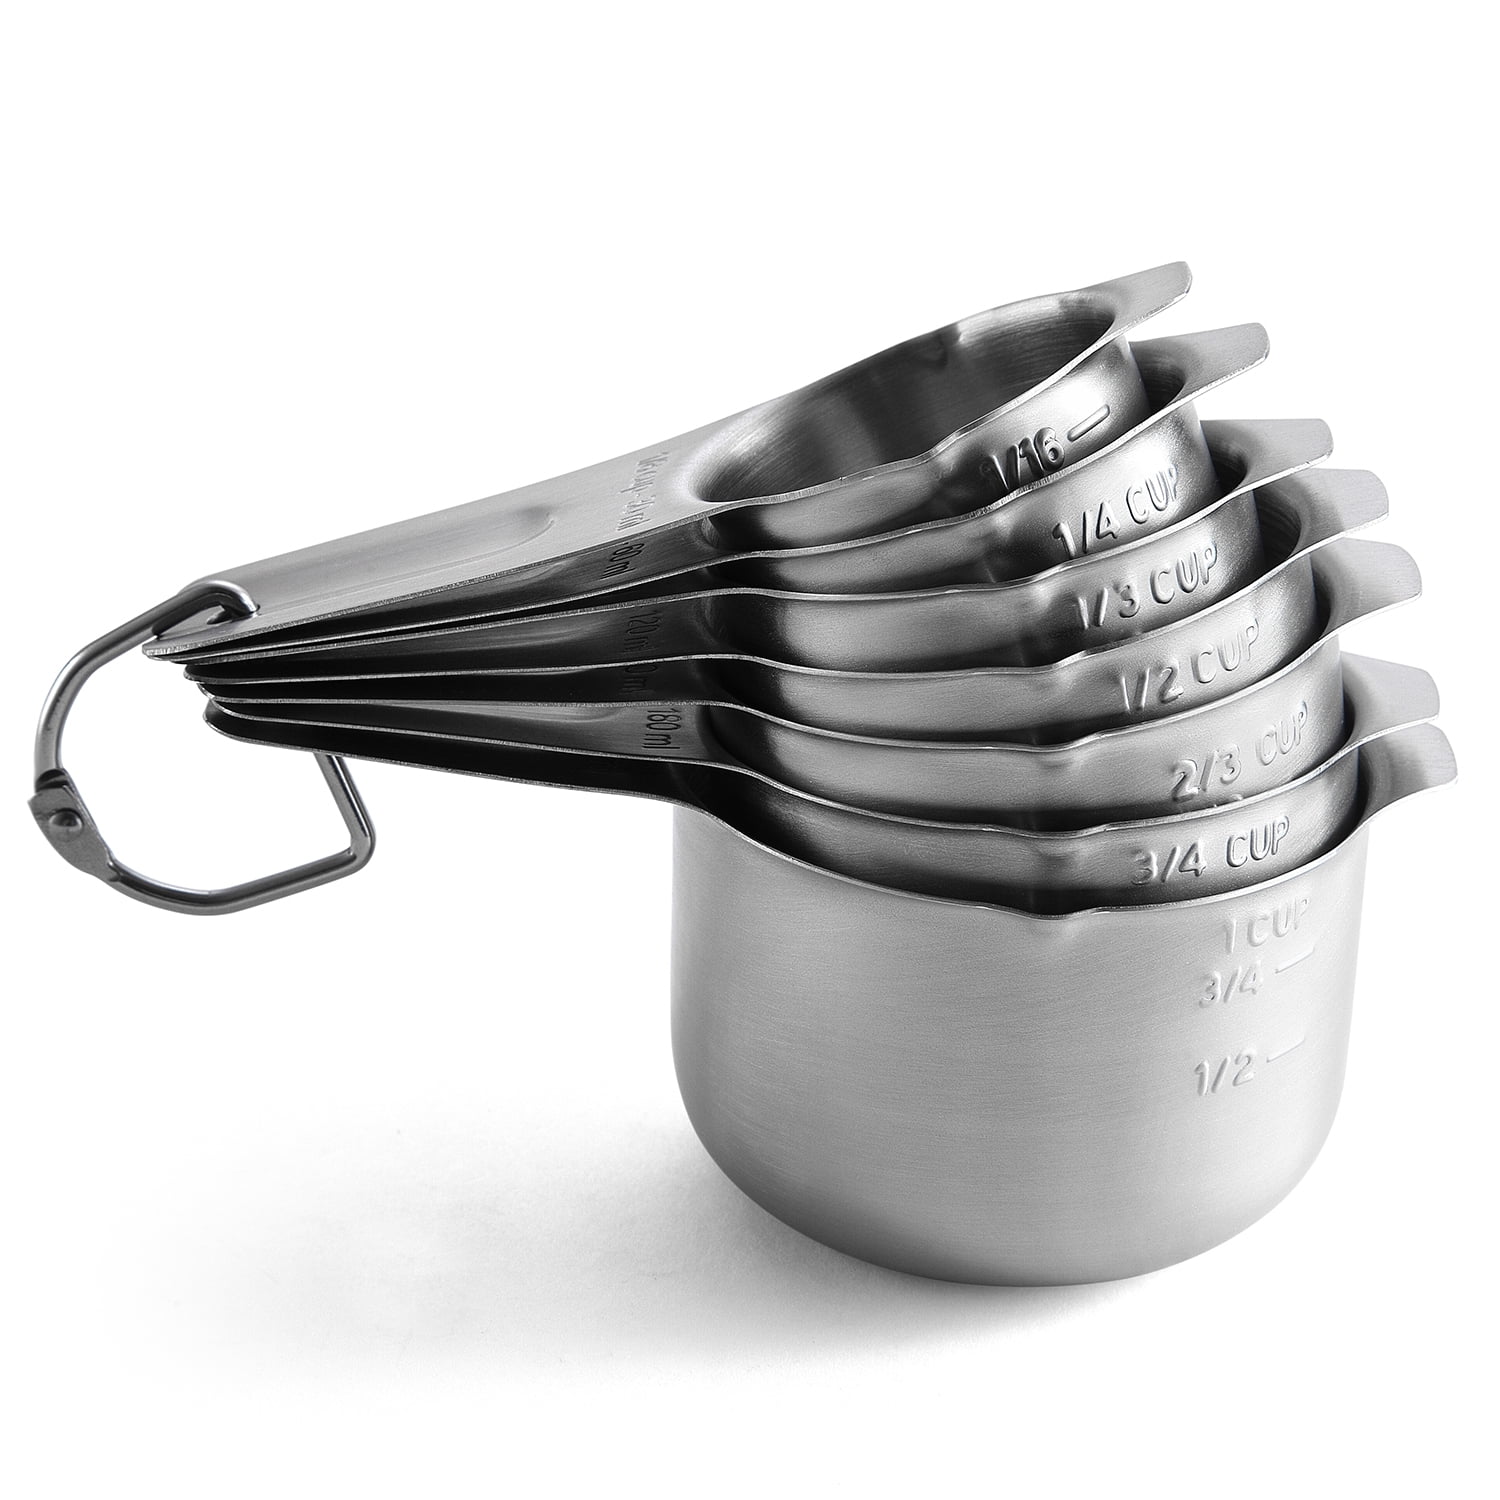 Spring Chef - Stainless Steel Measuring Cups, Kitchen Tools with Easy to Read Markings for Measuring Dry or Liquid Ingredients, Set of 7, Silver